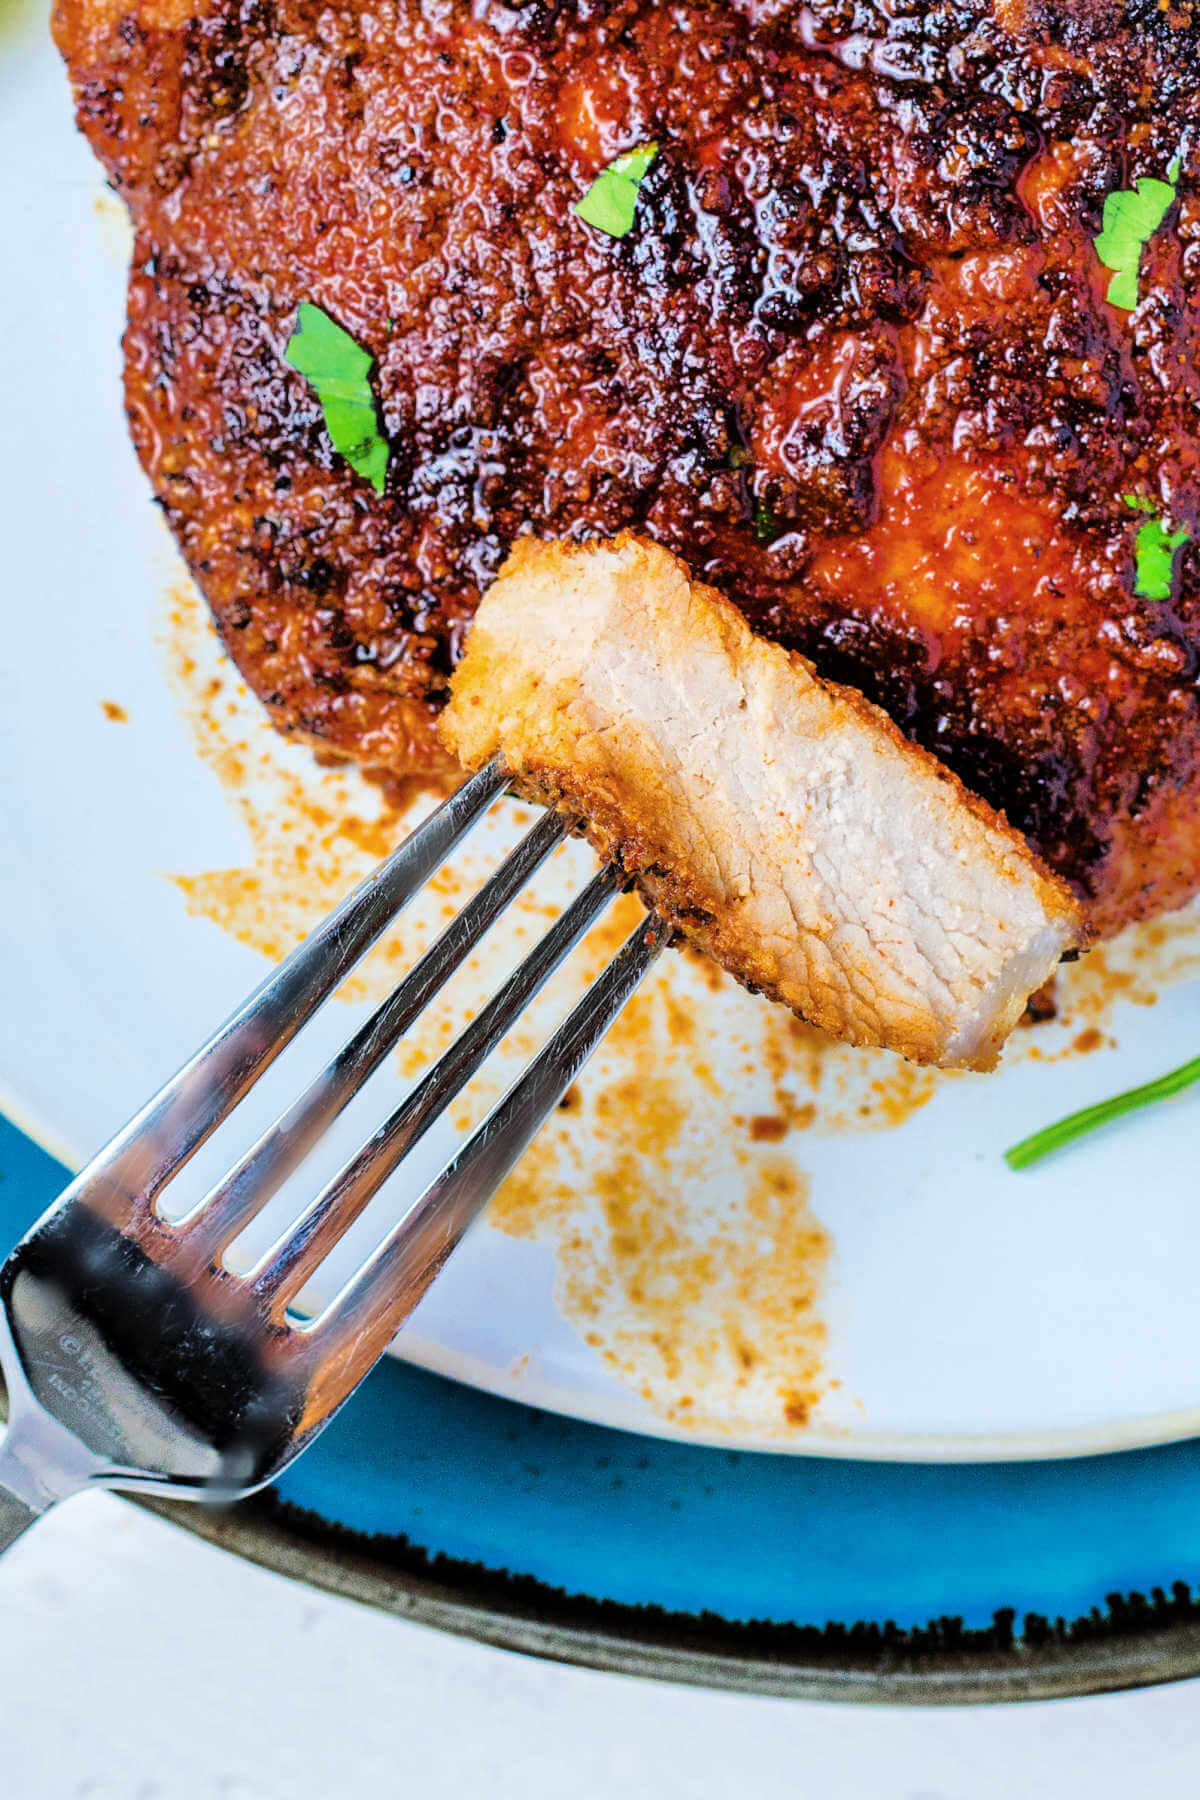 a slice of pork chop on a fork resting on a plate.